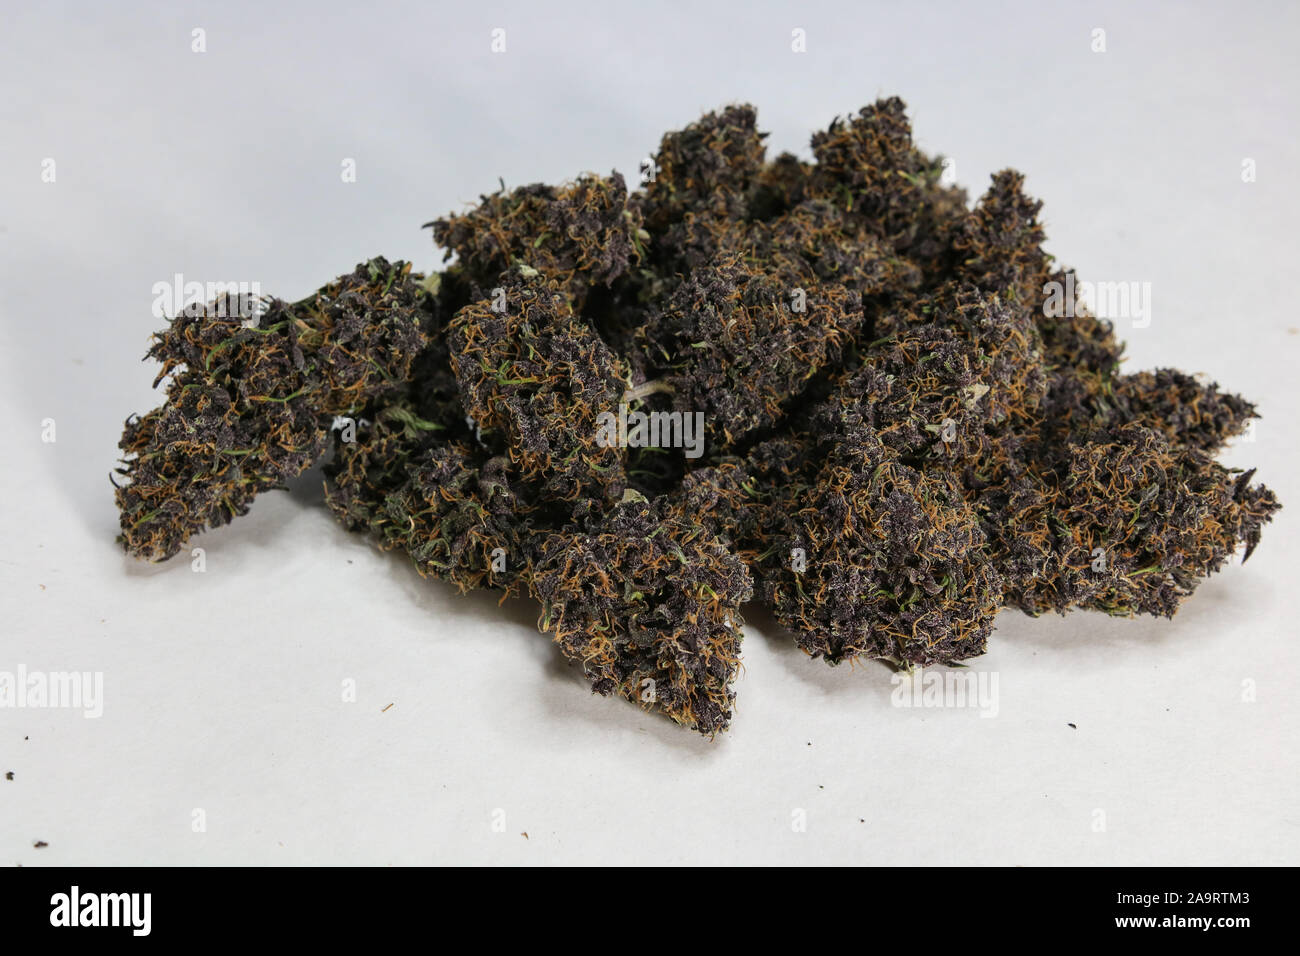 Home grown high quality purple Cannabis buds on white background. Strain is Anvil, an indica. Grown in Oregon, a legal medical and recreational state. Stock Photo